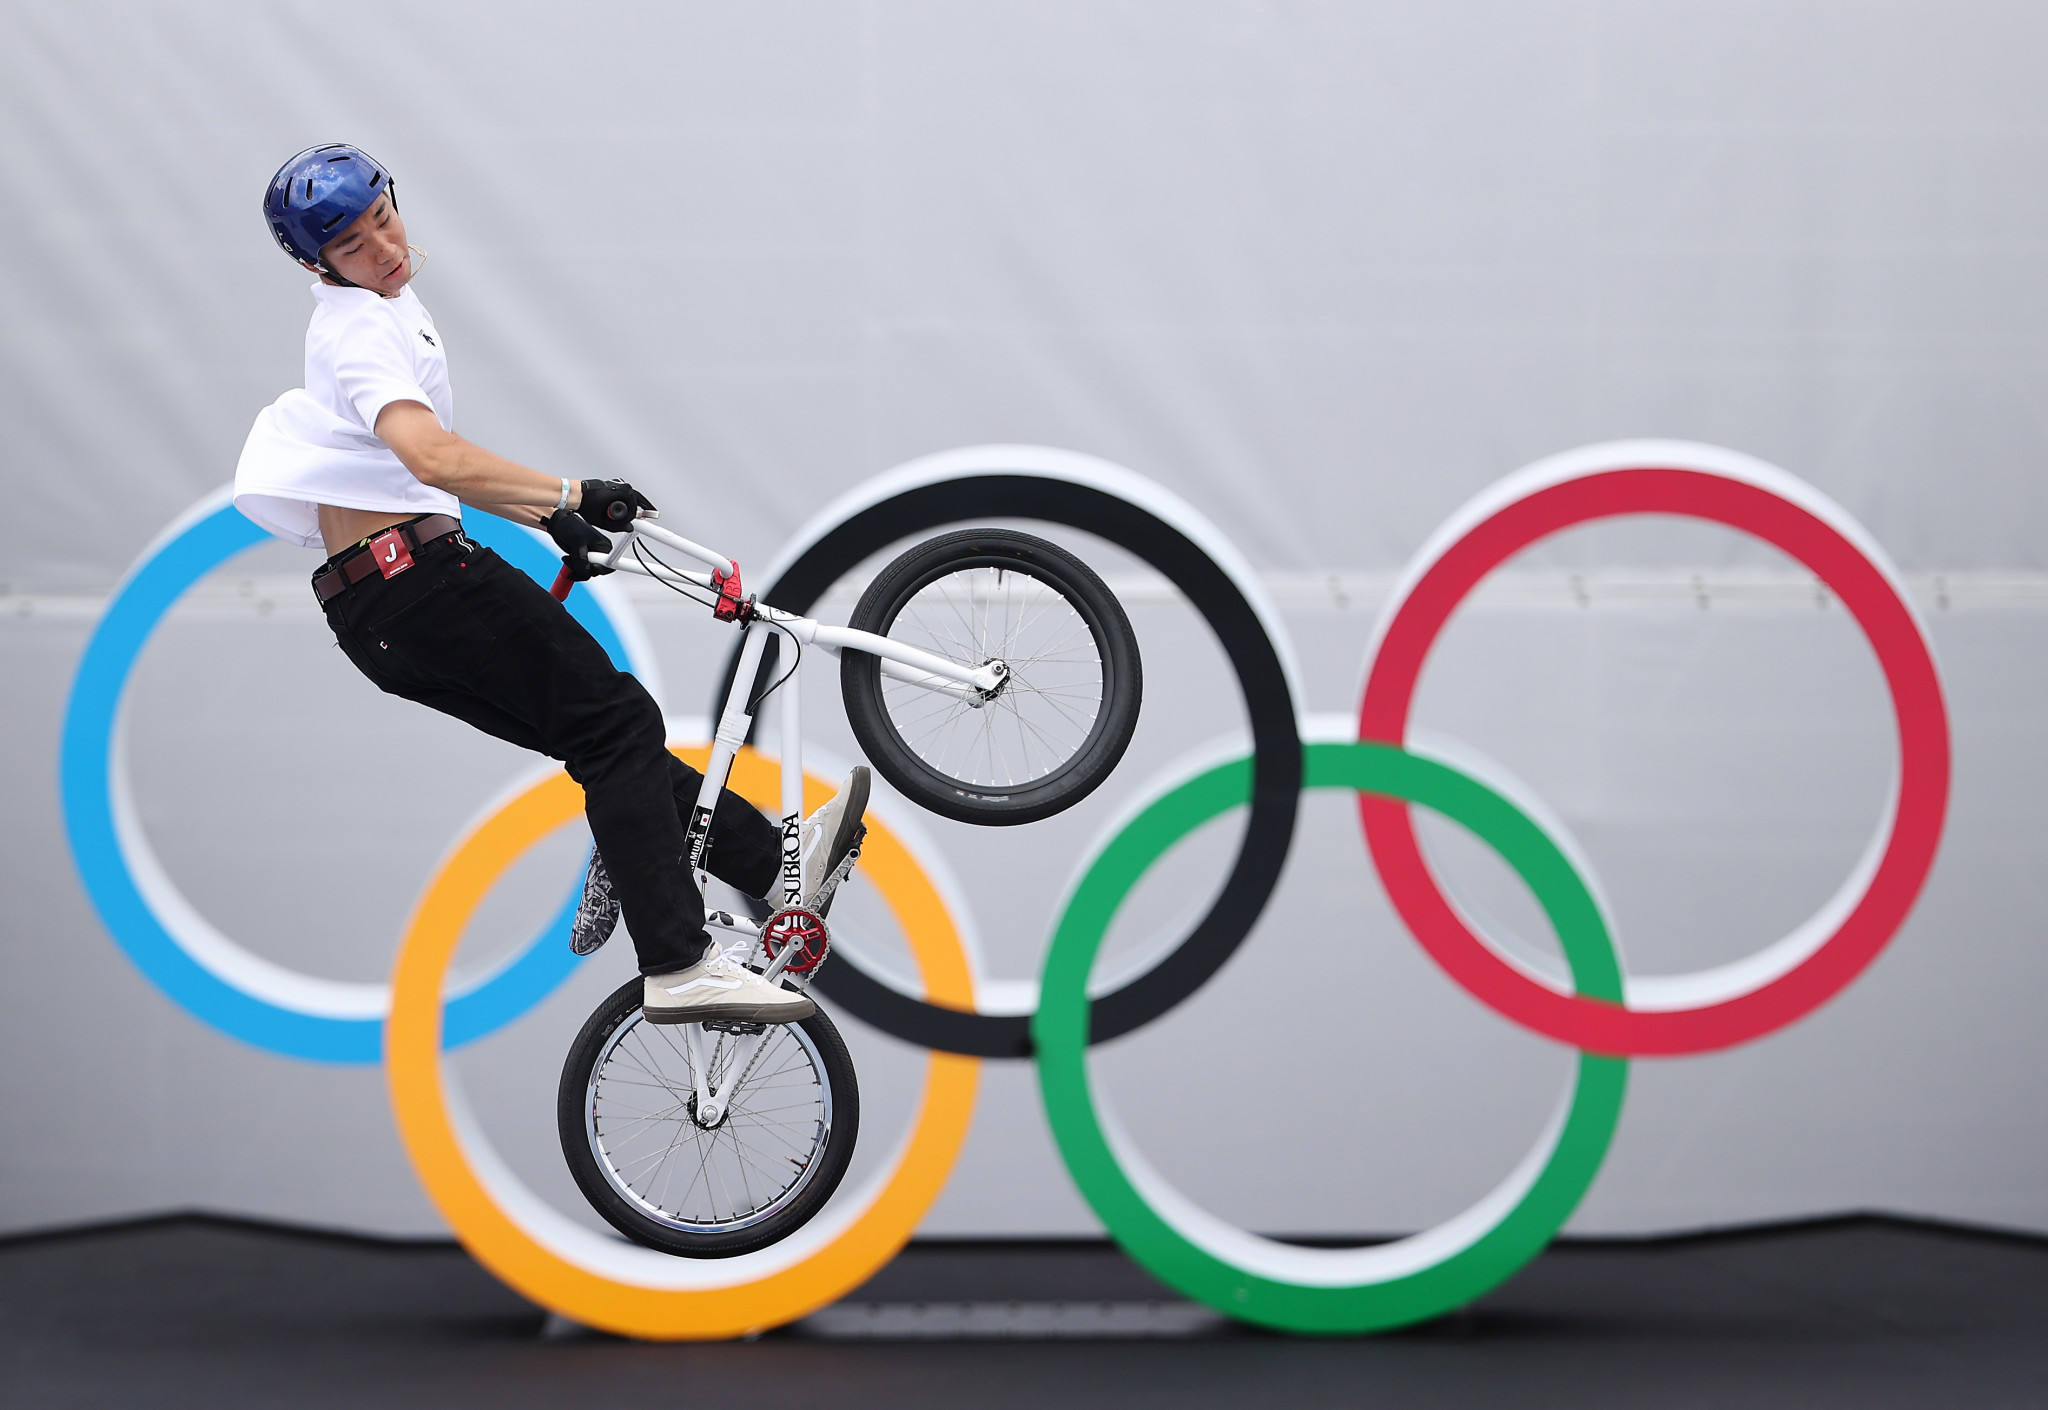 Freestyle BMX made its Olympic debut at Tokyo 2020 and is set to feature again at Paris 2024 with six extra places for athletes ©Getty Images